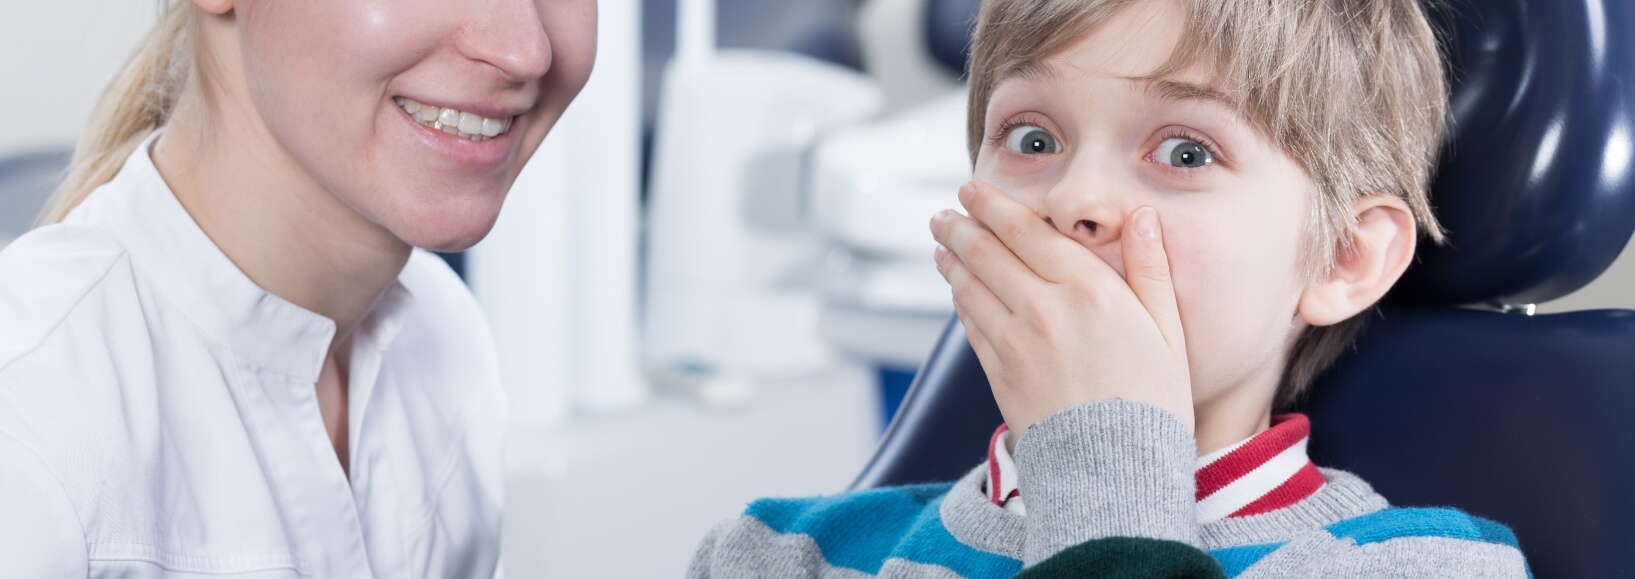 boy in dentist chair covering his mouth in fear